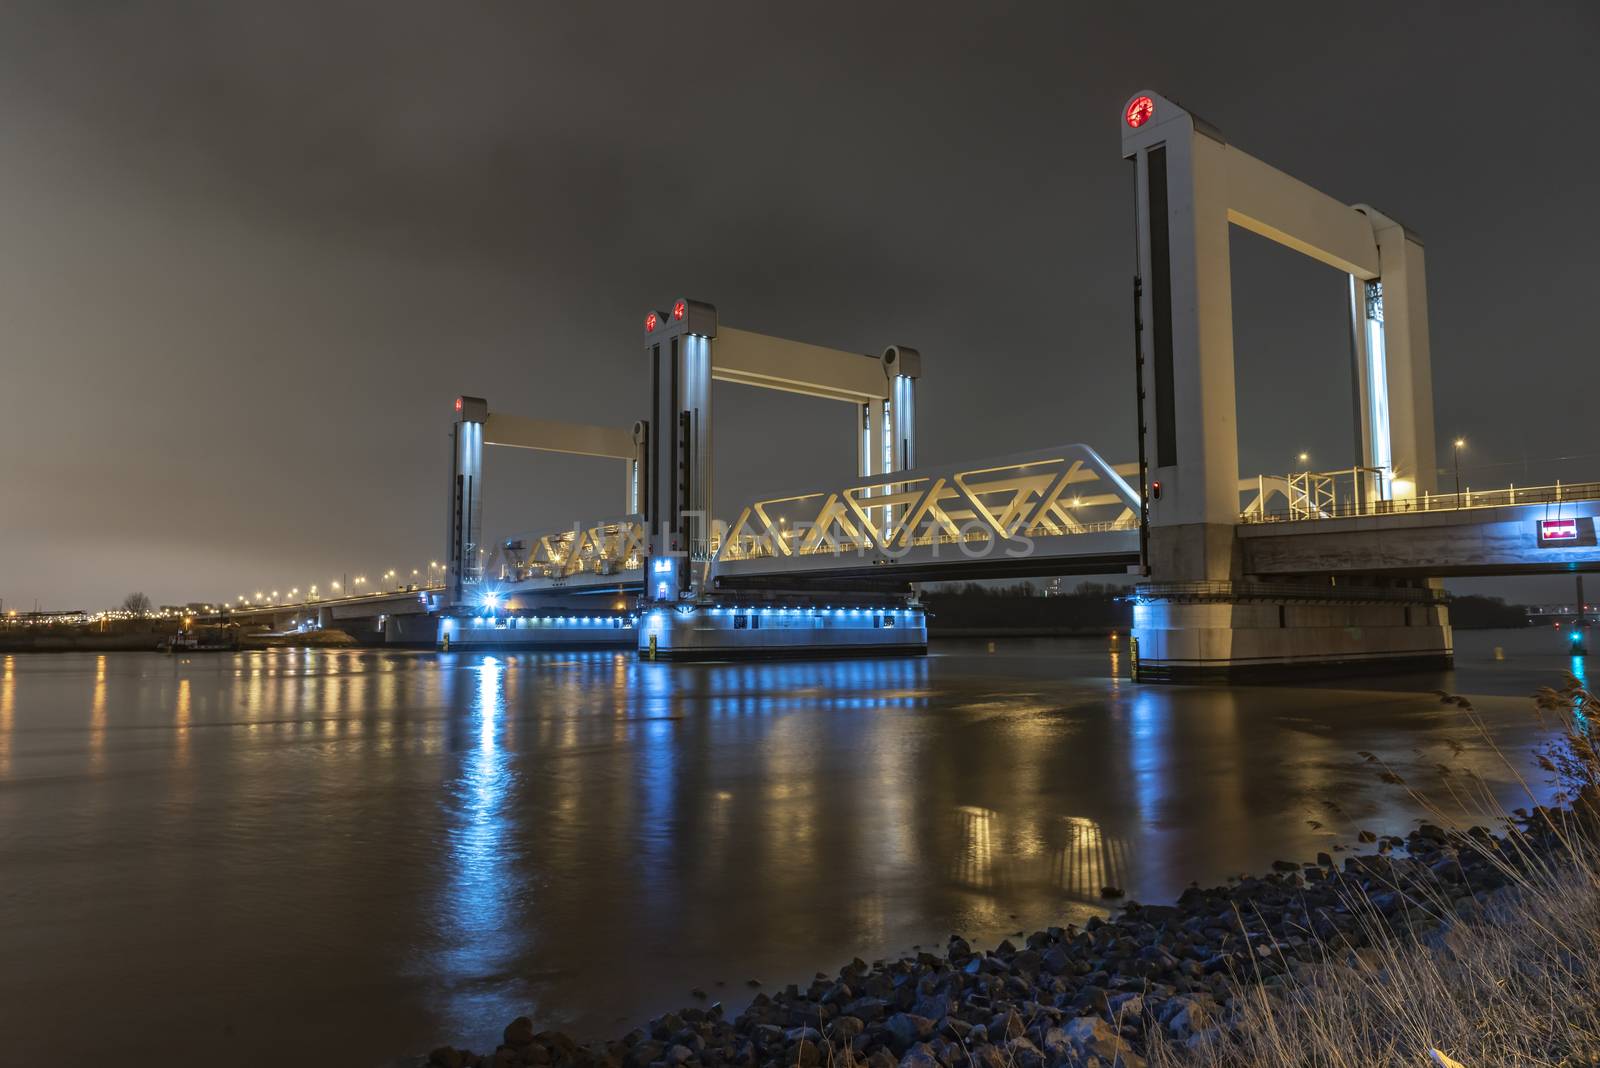 ROTTERDAM, 21 March 2019 - View of the Botlek bridge at the entrance of Rotterdam city by boats reflection on the calm water against a chemical industrial compound lighting the night sky, Netherlands by ankorlight